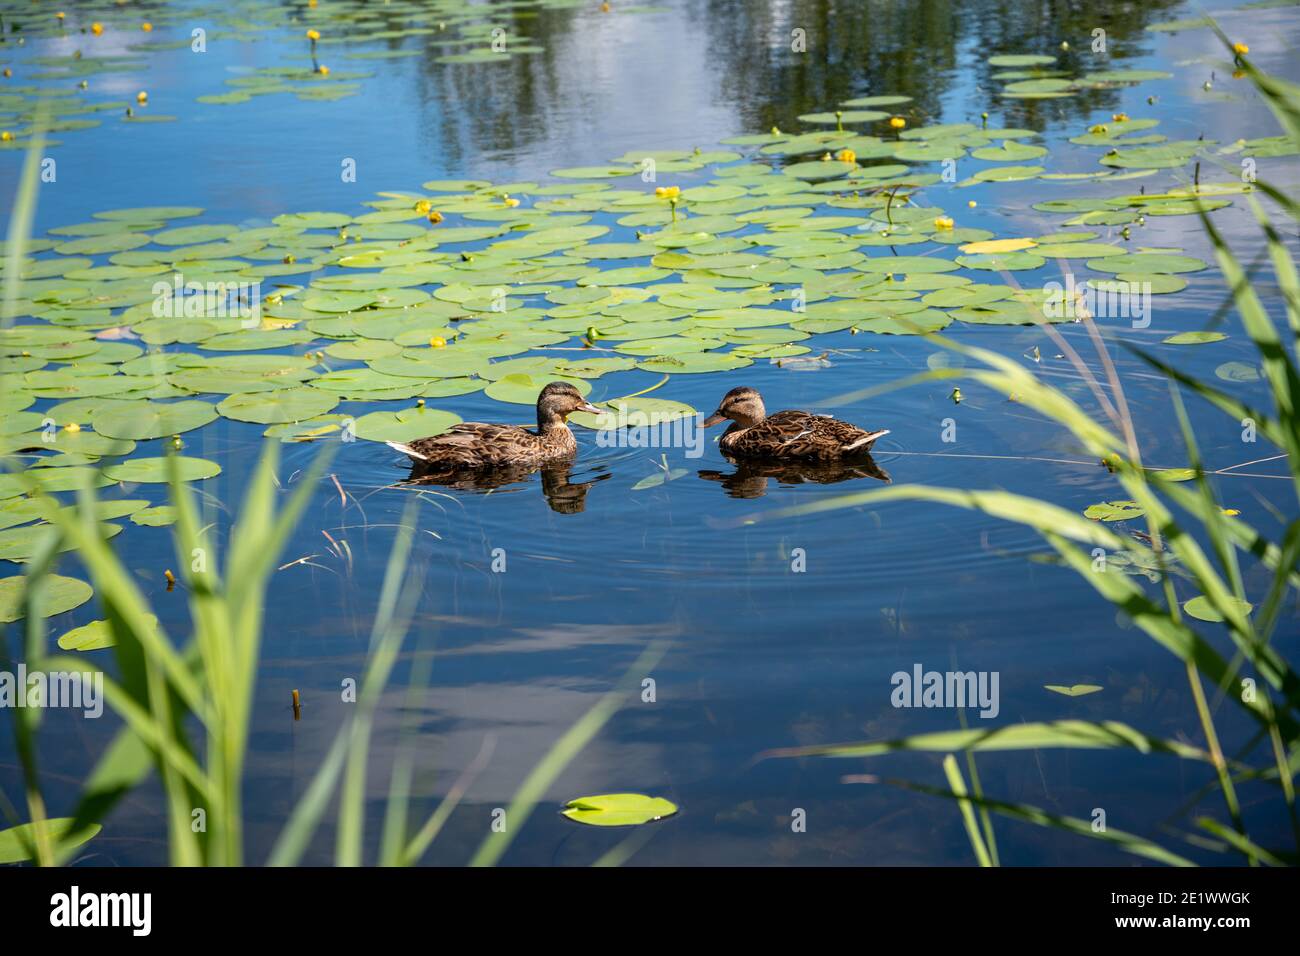 Two ducks on a smooth water surface. Stock Photo